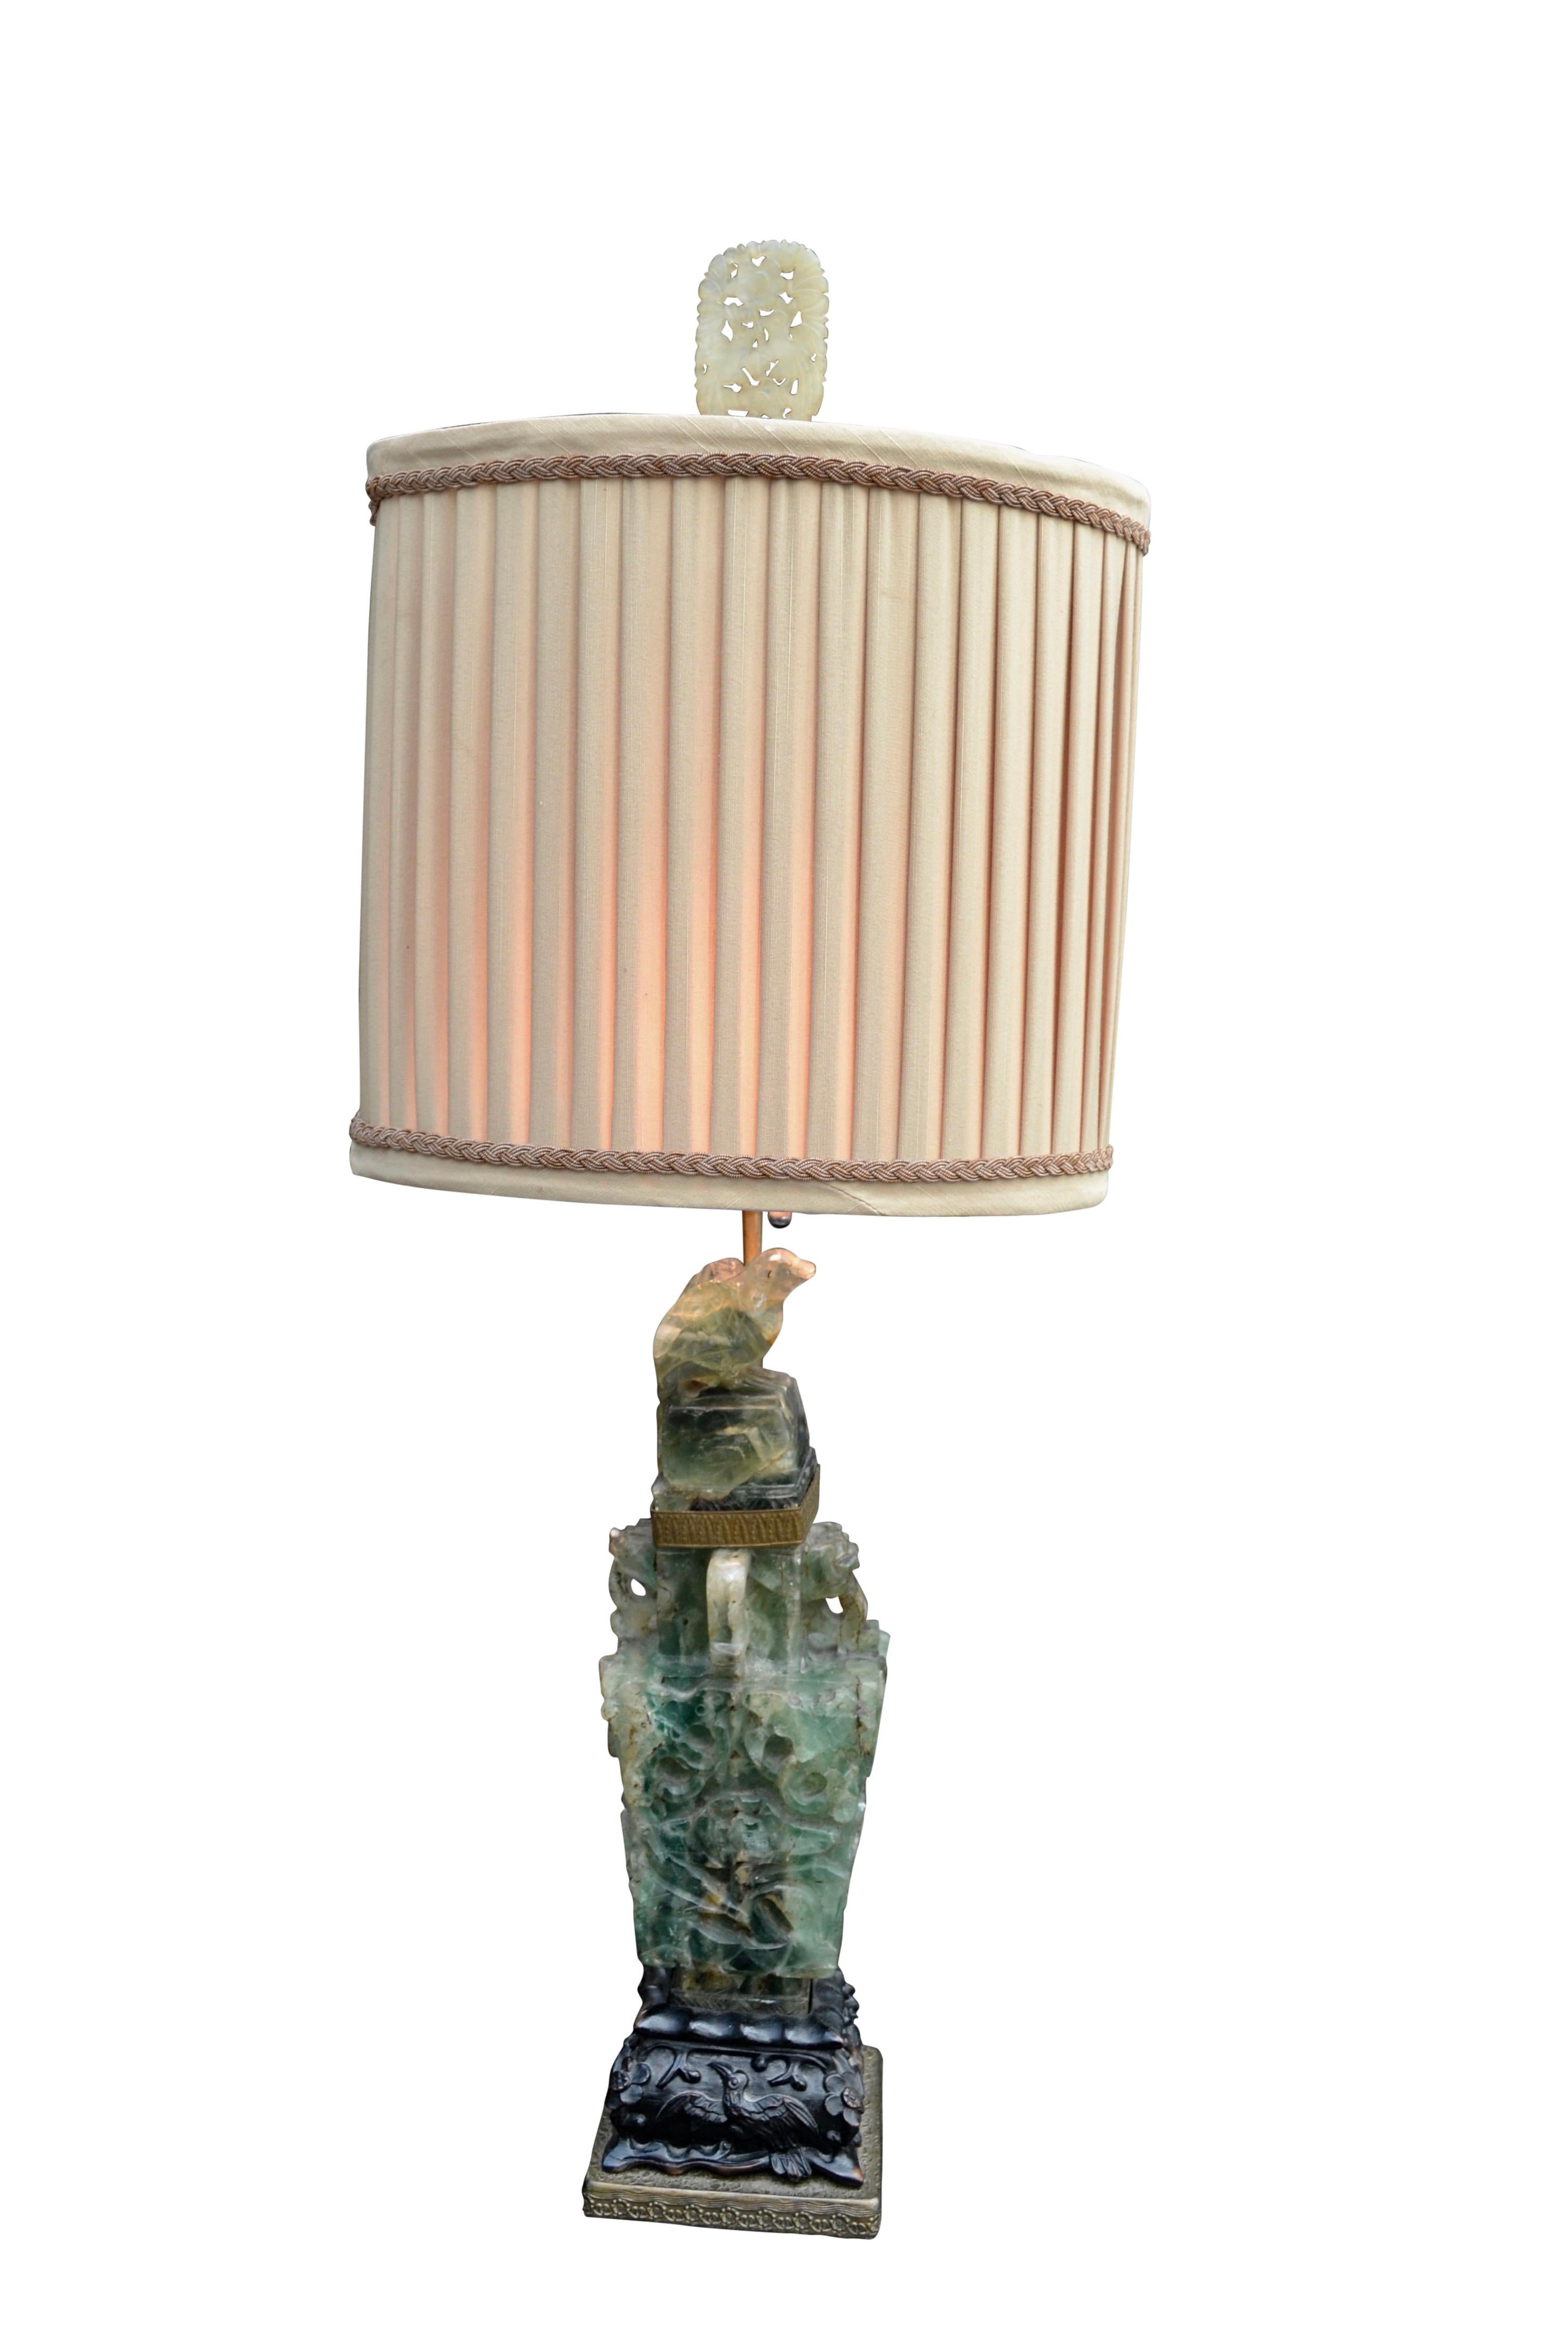 A relatively small but beautifully carved Chinese green quartz lamp with a removable carved bird top, set on a craved wood base. The lamp comes with a pleated silk shade and an original jade finial.